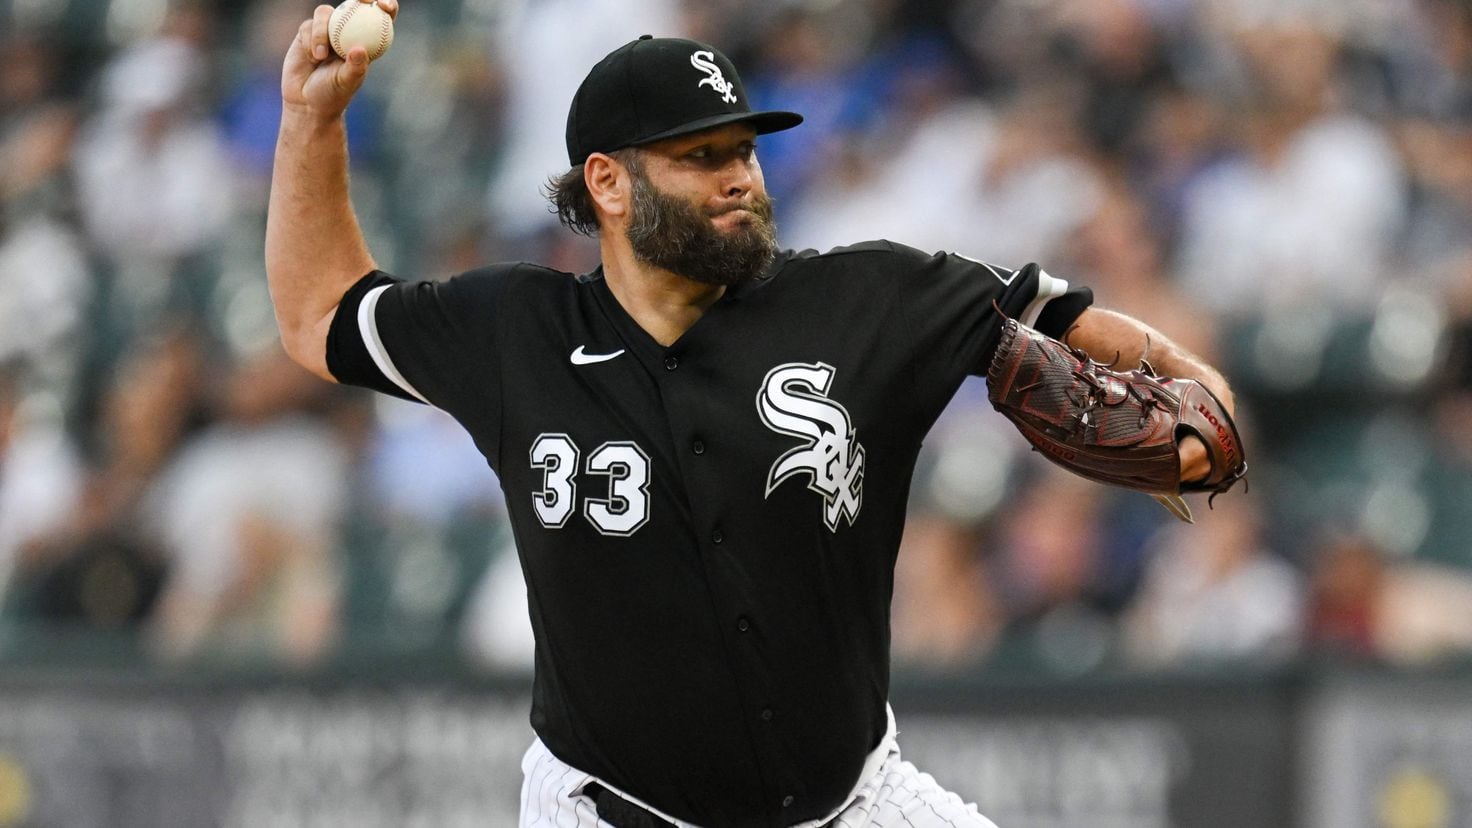 White Sox in full fire sale mode, deal Lance Lynn and Joe Kelly to